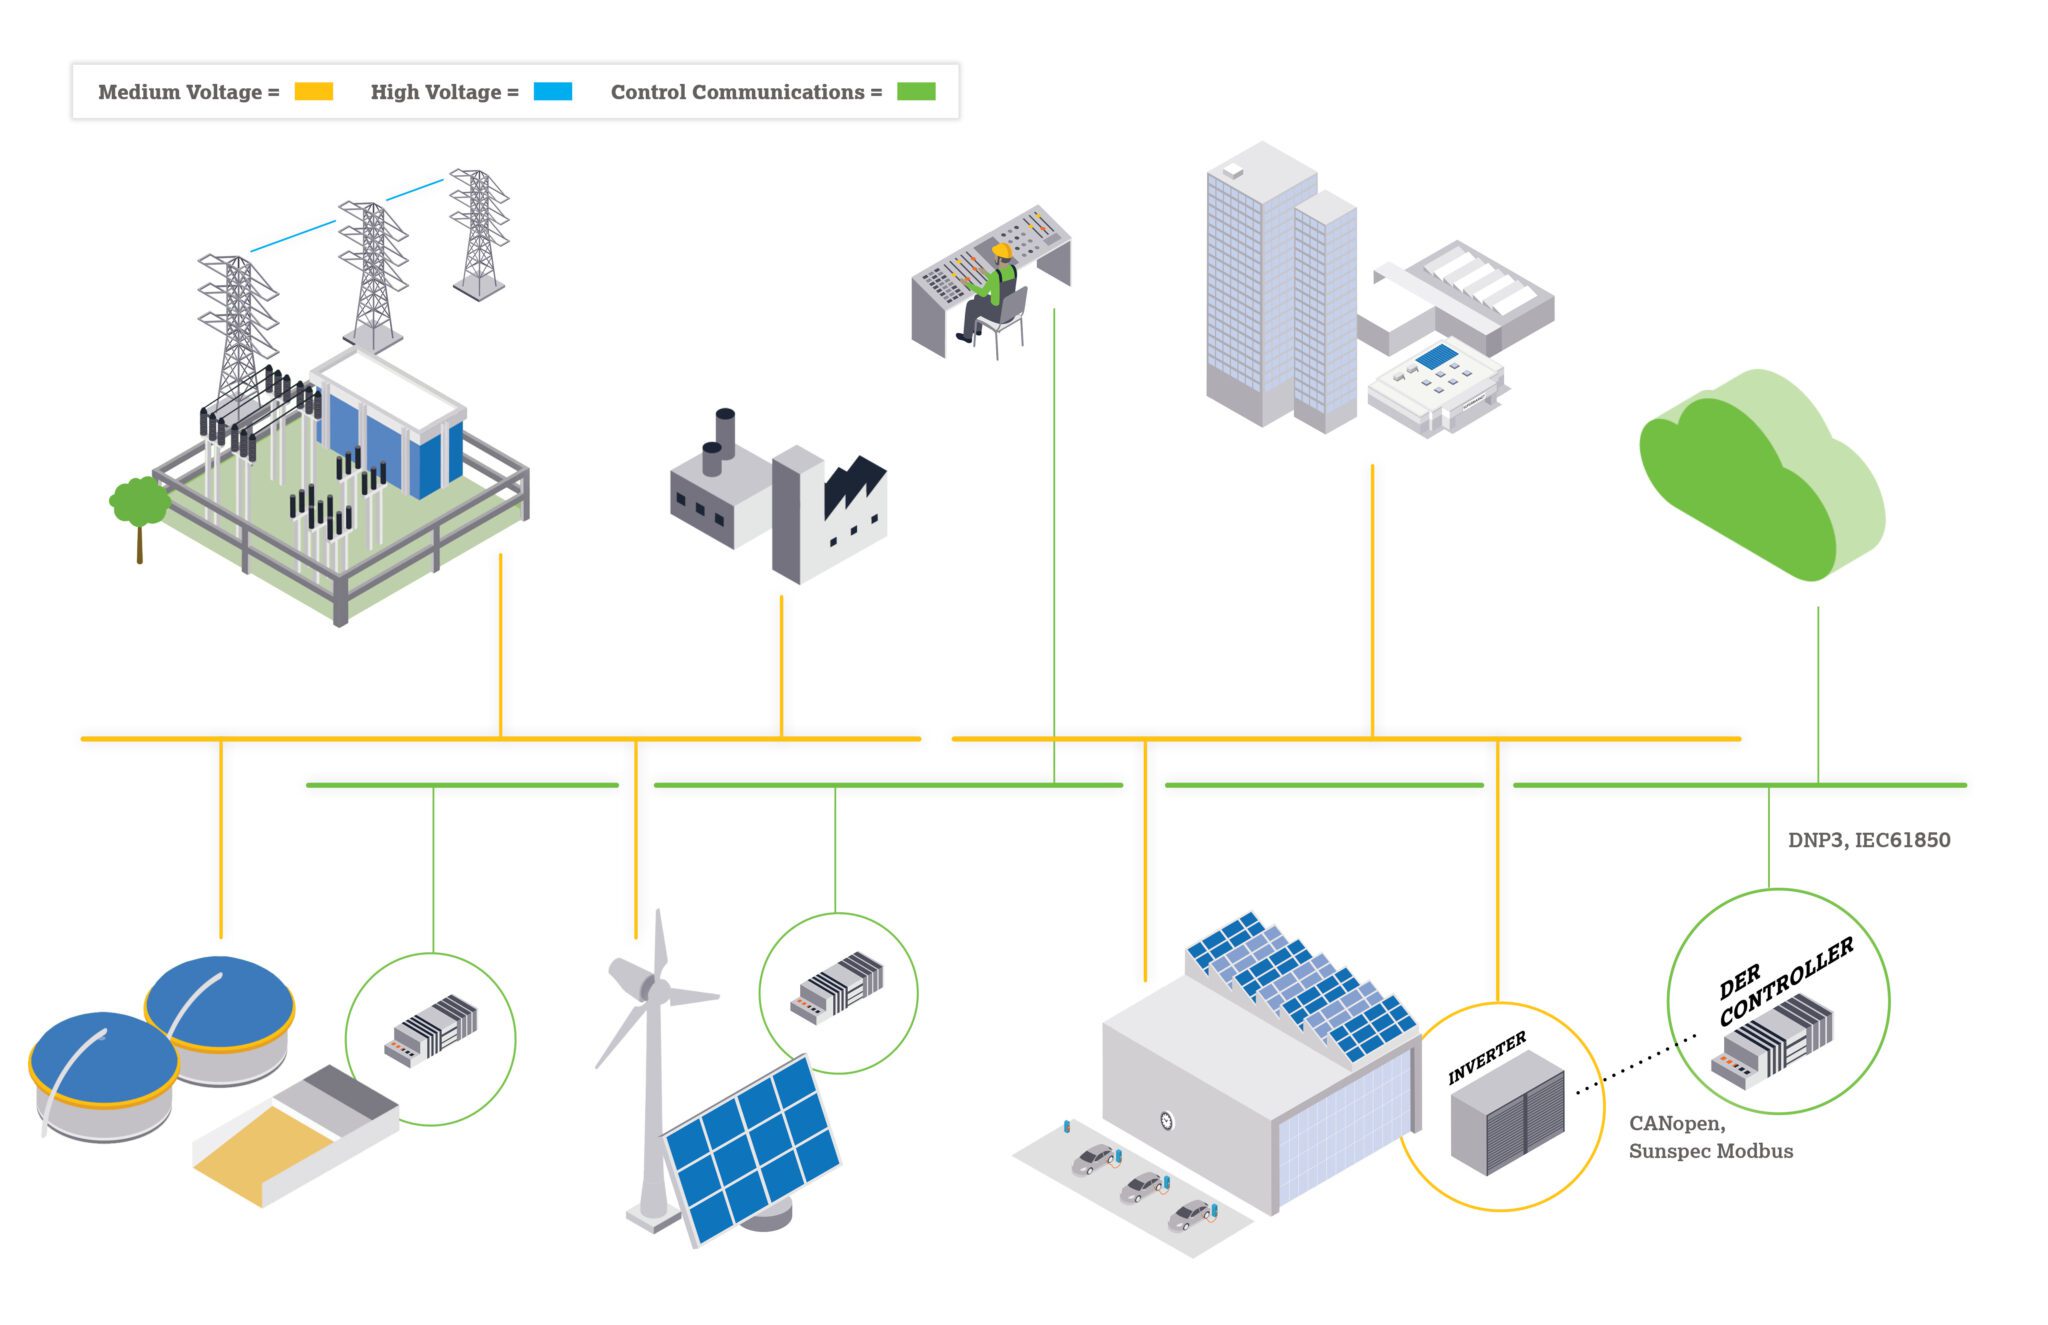 The new Distributed Energy Resources (DER) Controller from WAGO